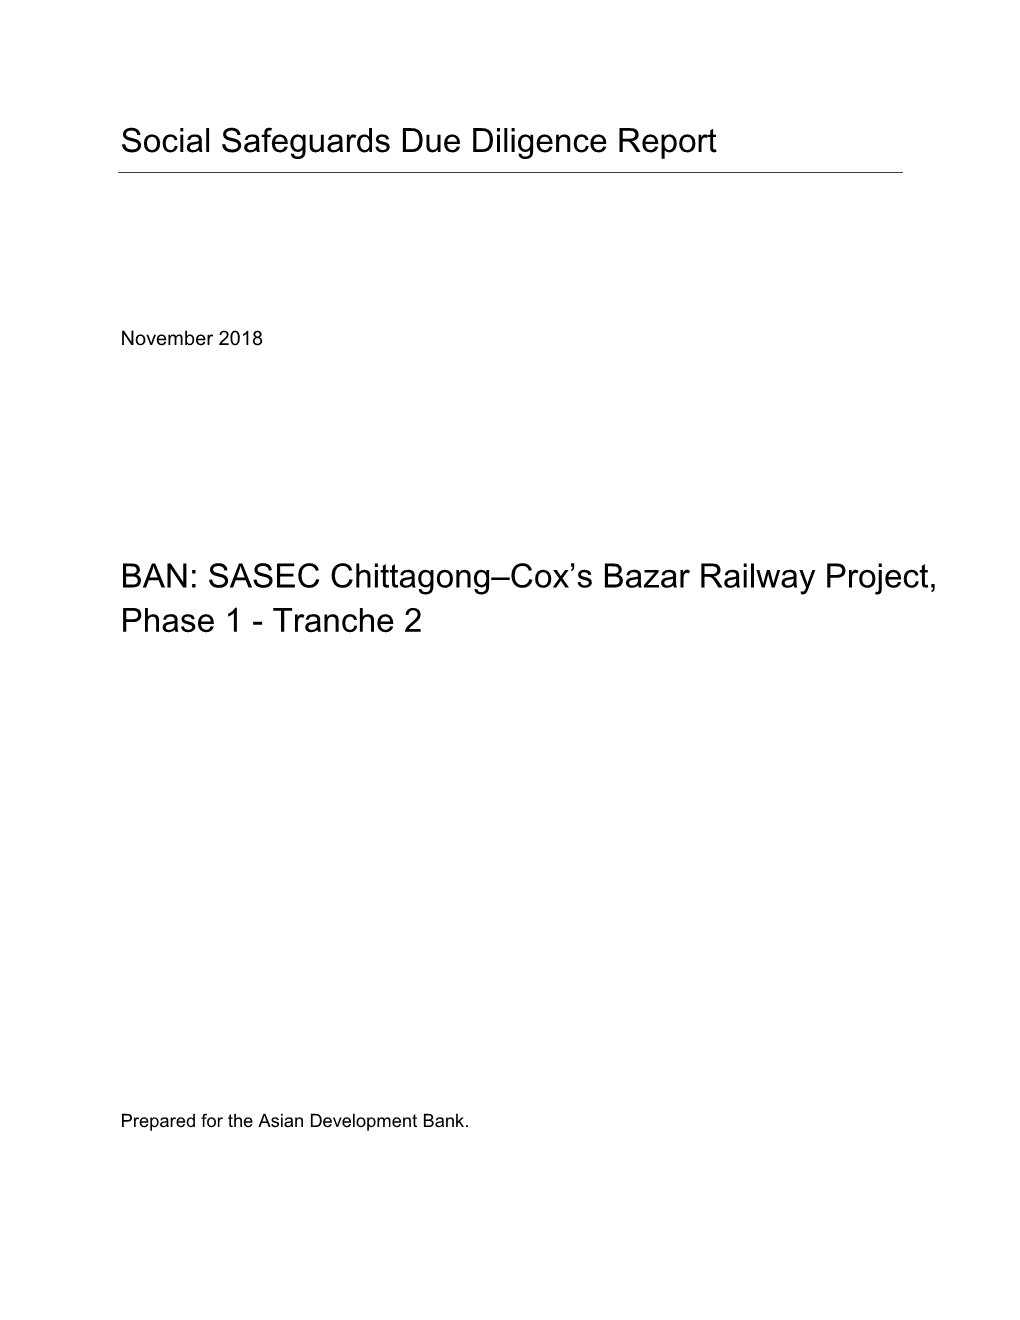 SASEC Chittagong–Cox's Bazar Railway Project, Phase 1